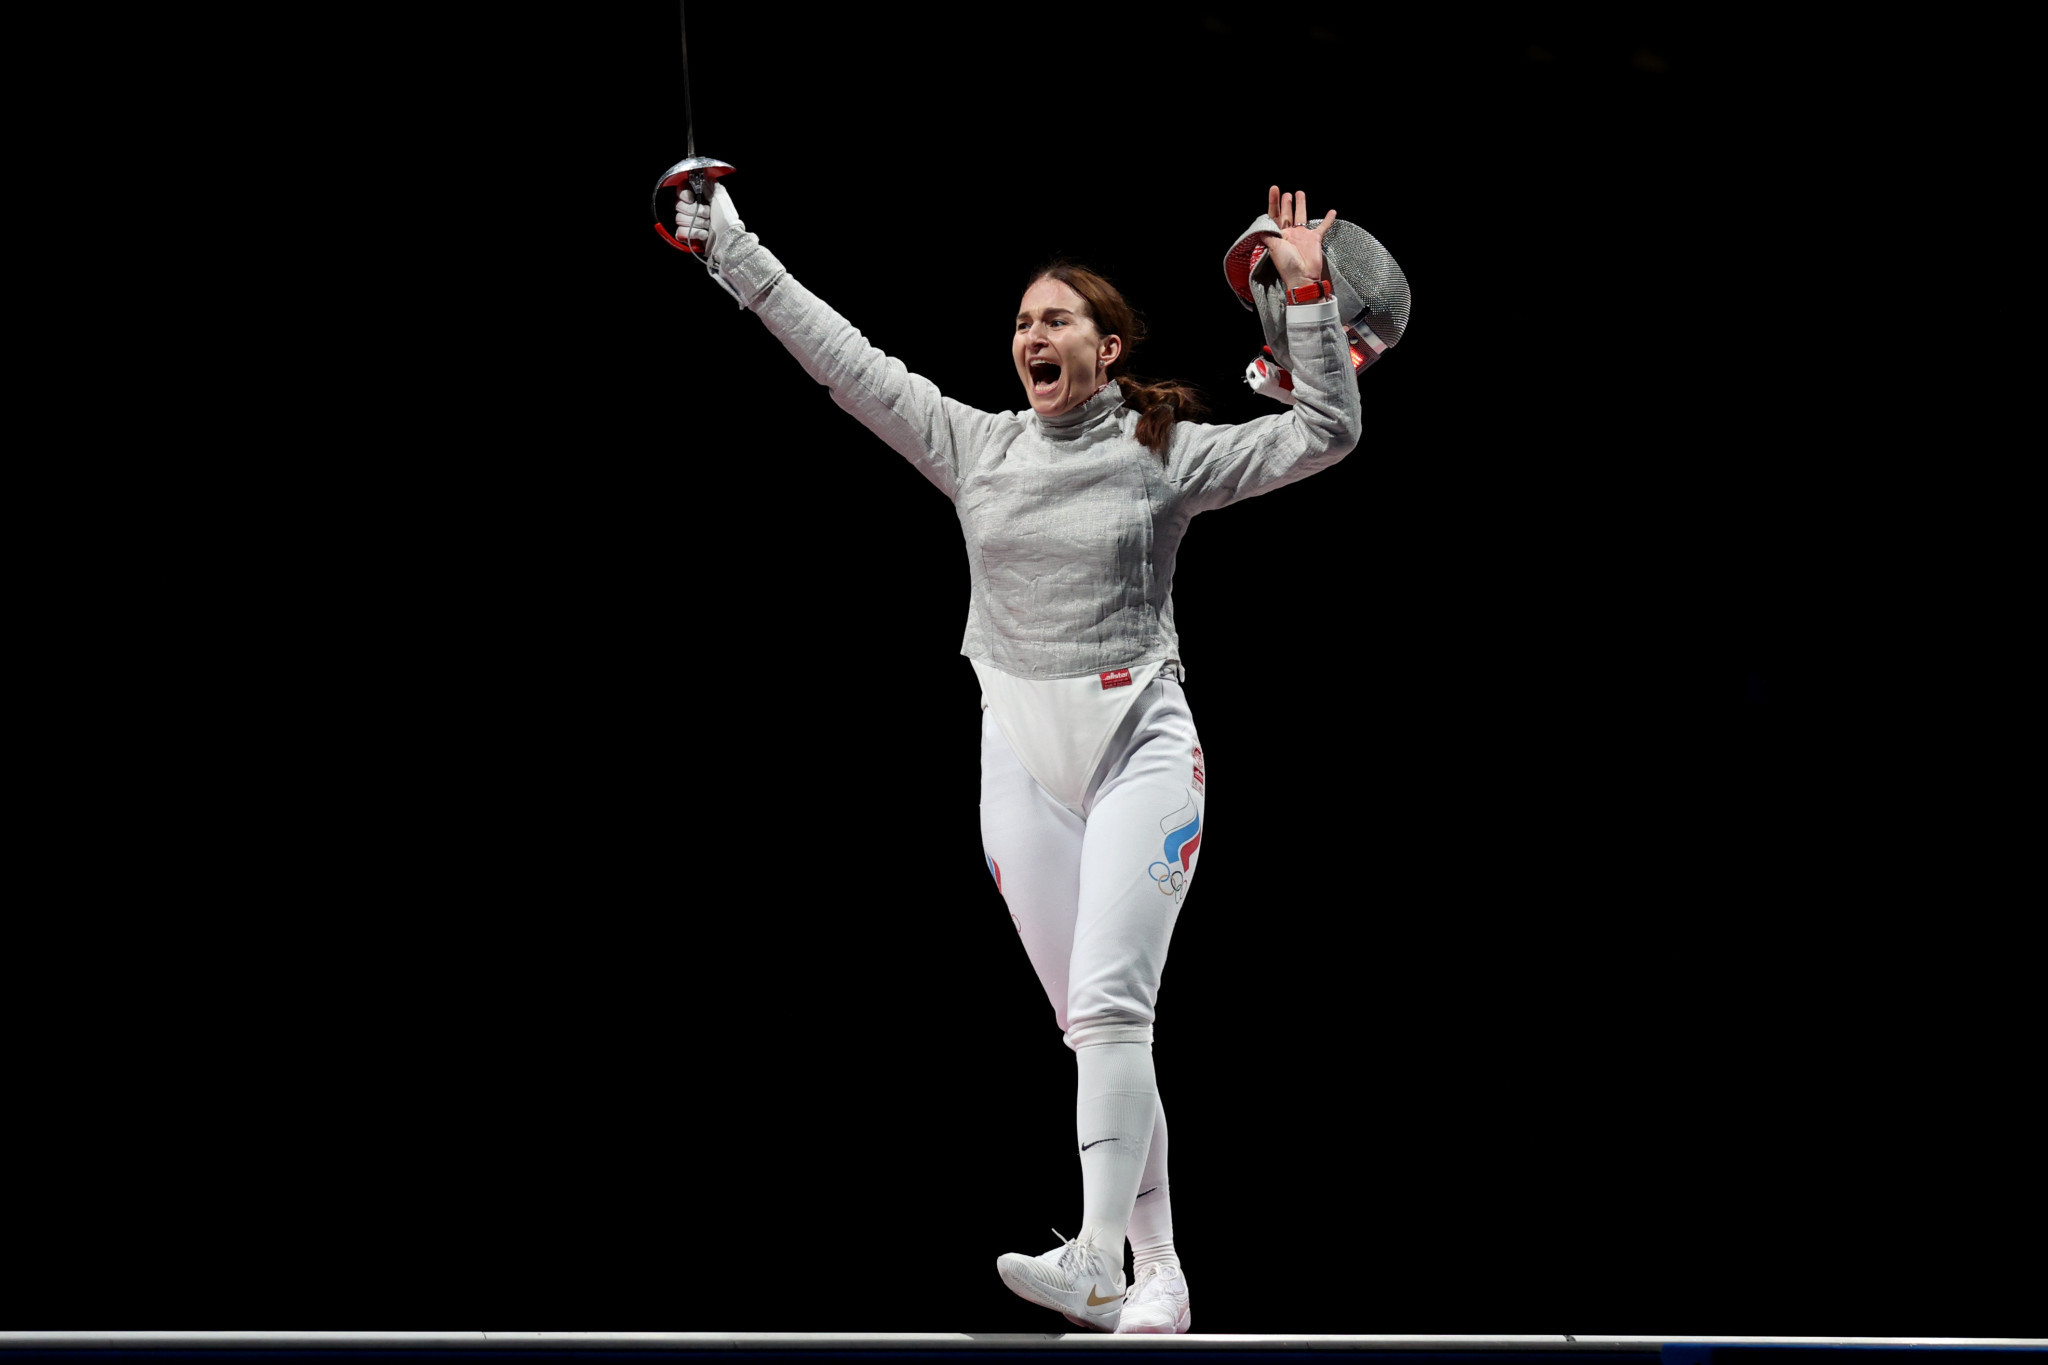 Sofya Velikaya claimed team sabre gold and individual sabre silver for the ROC at Tokyo 2020 ©Getty Images